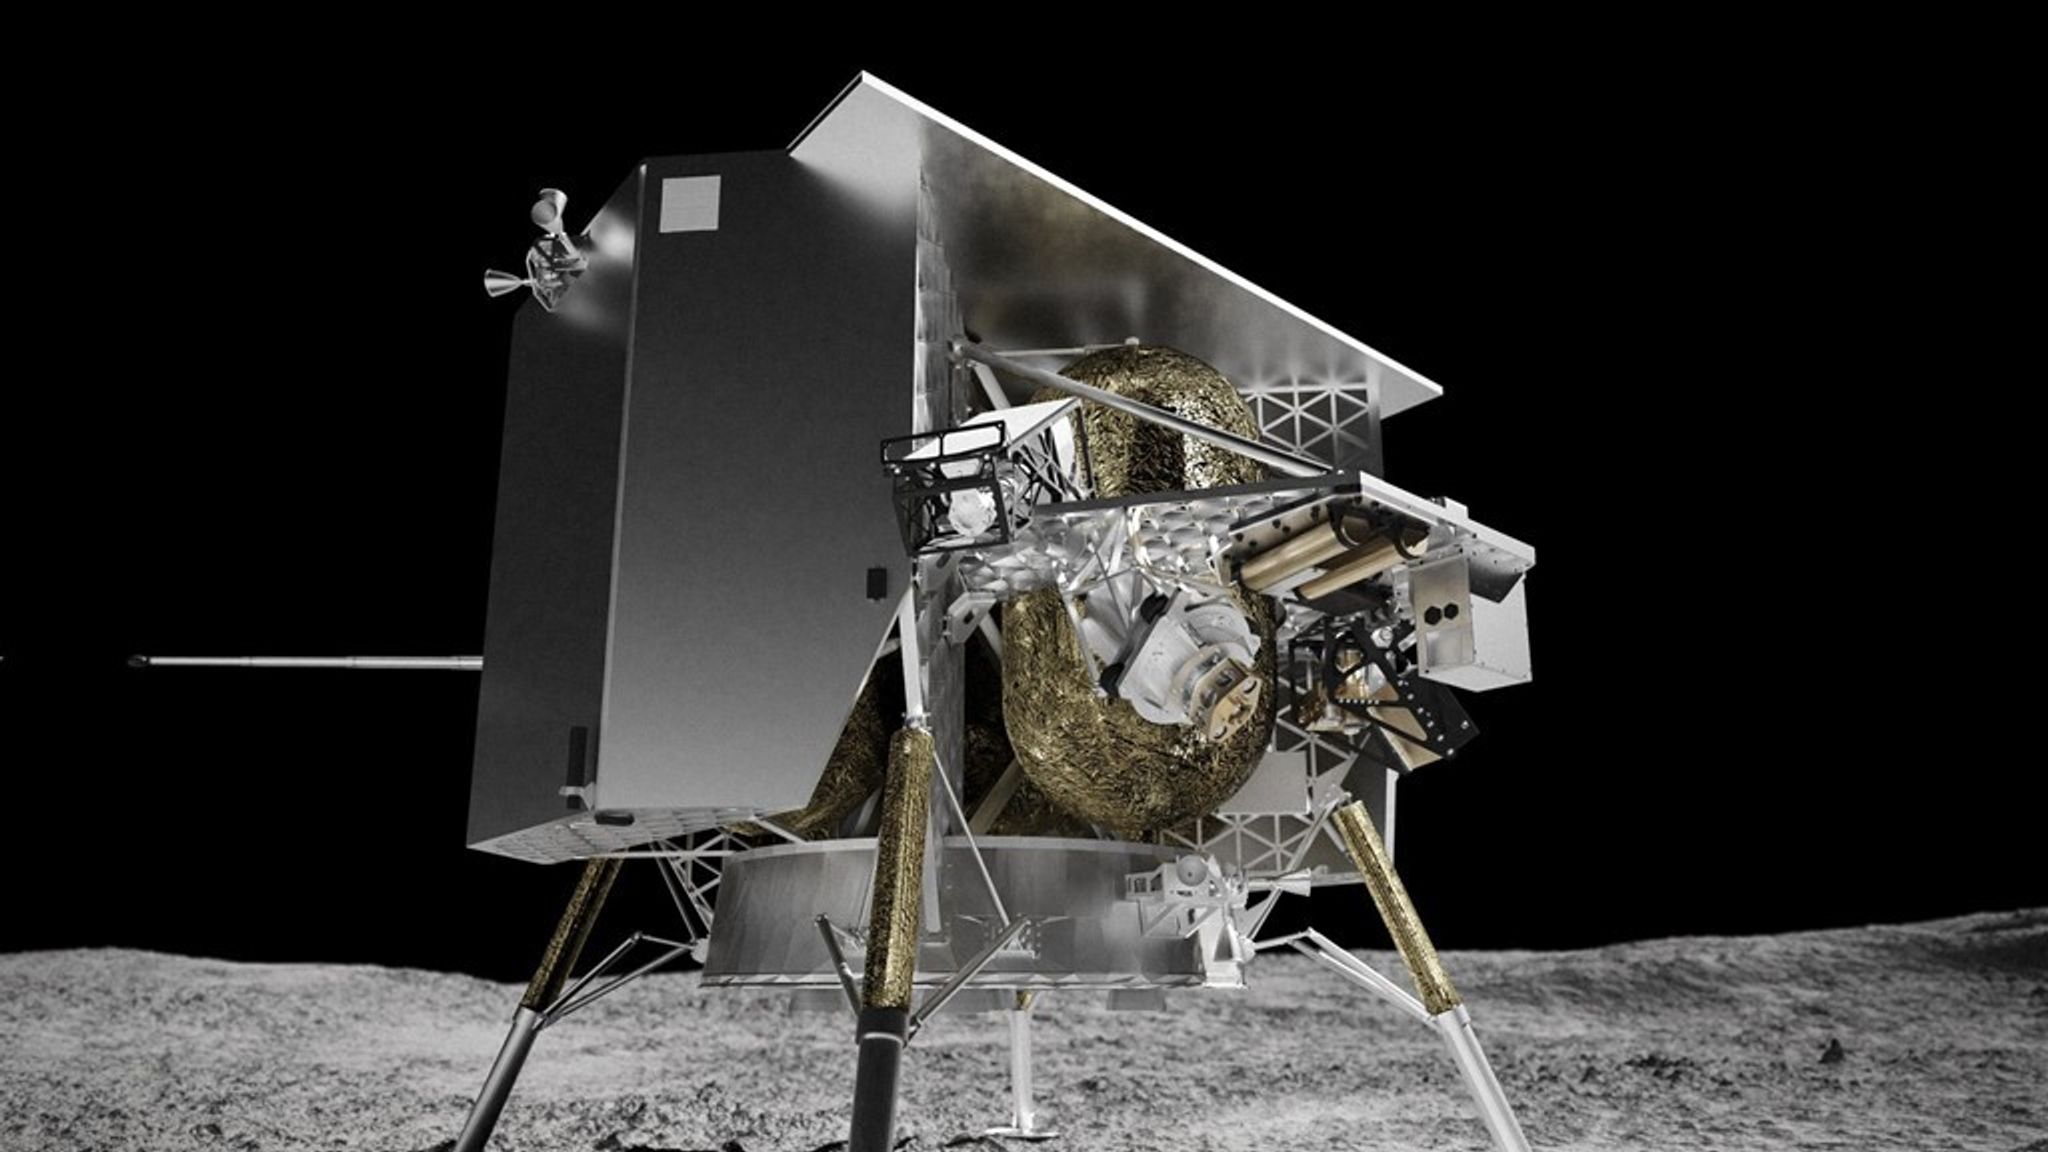 Doomed Peregrine moon lander will 'burn up' on return to Earth after failed mission, says Astrobotic